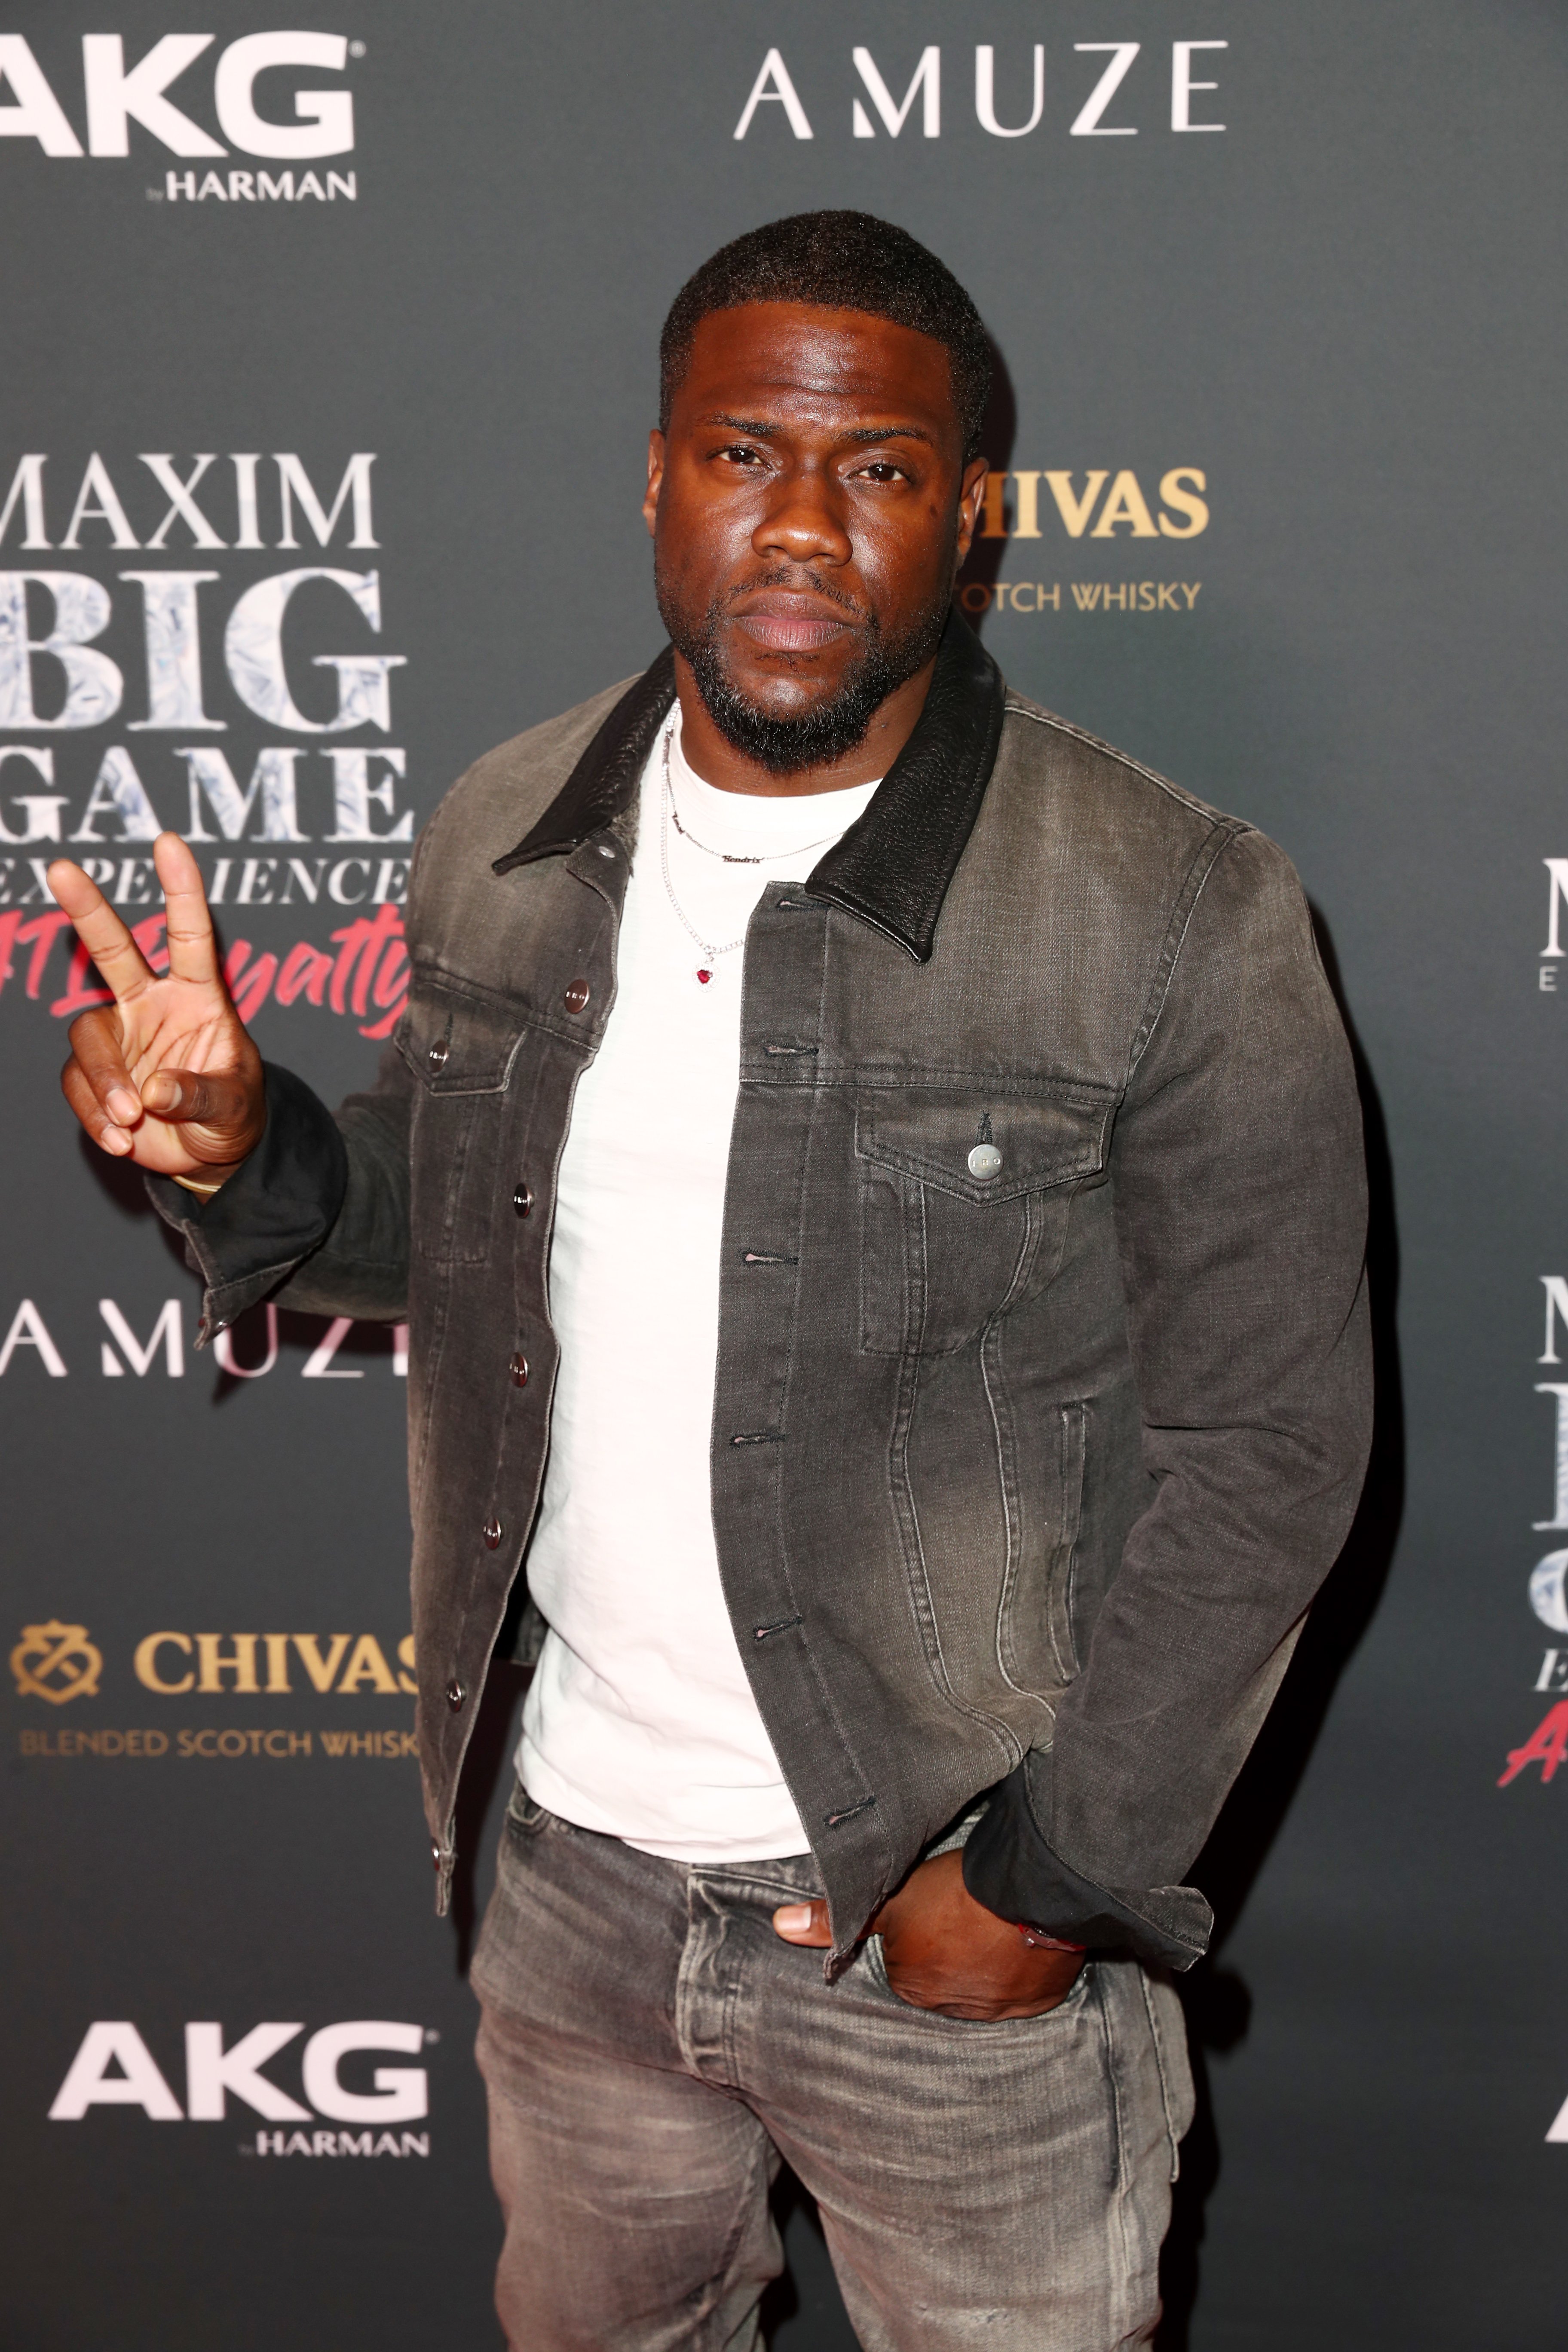 Kevin Hart attends The Maxim Big Game Experience on February 02, 2019, in Atlanta, Georgia. | Source: Getty Images.